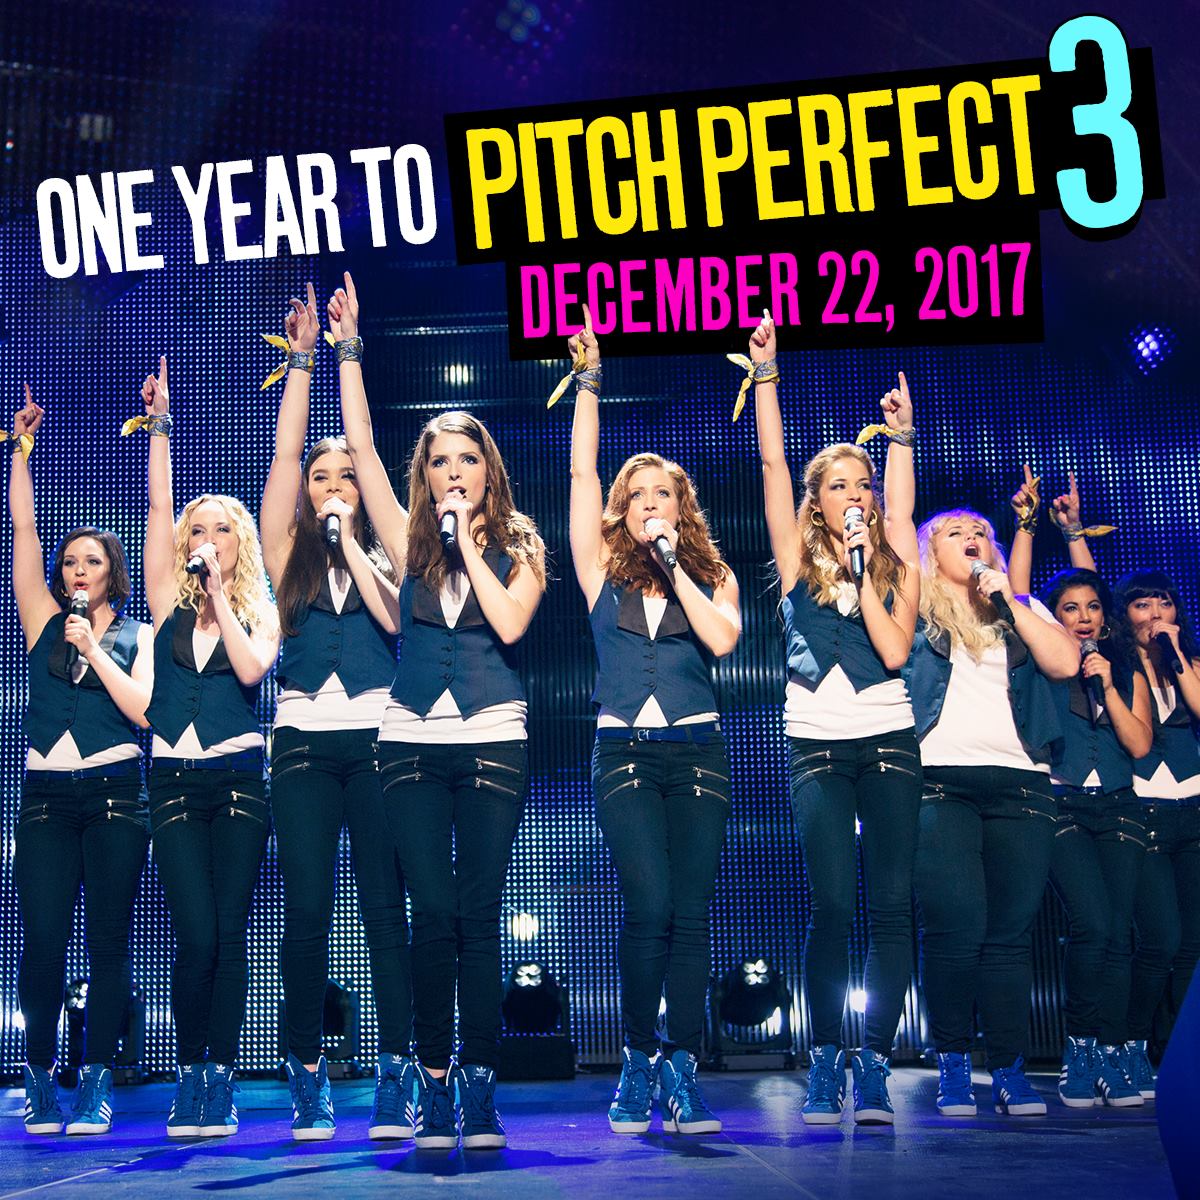 Pitch Perfect 3 (Pitch Perfect Facebook Page)